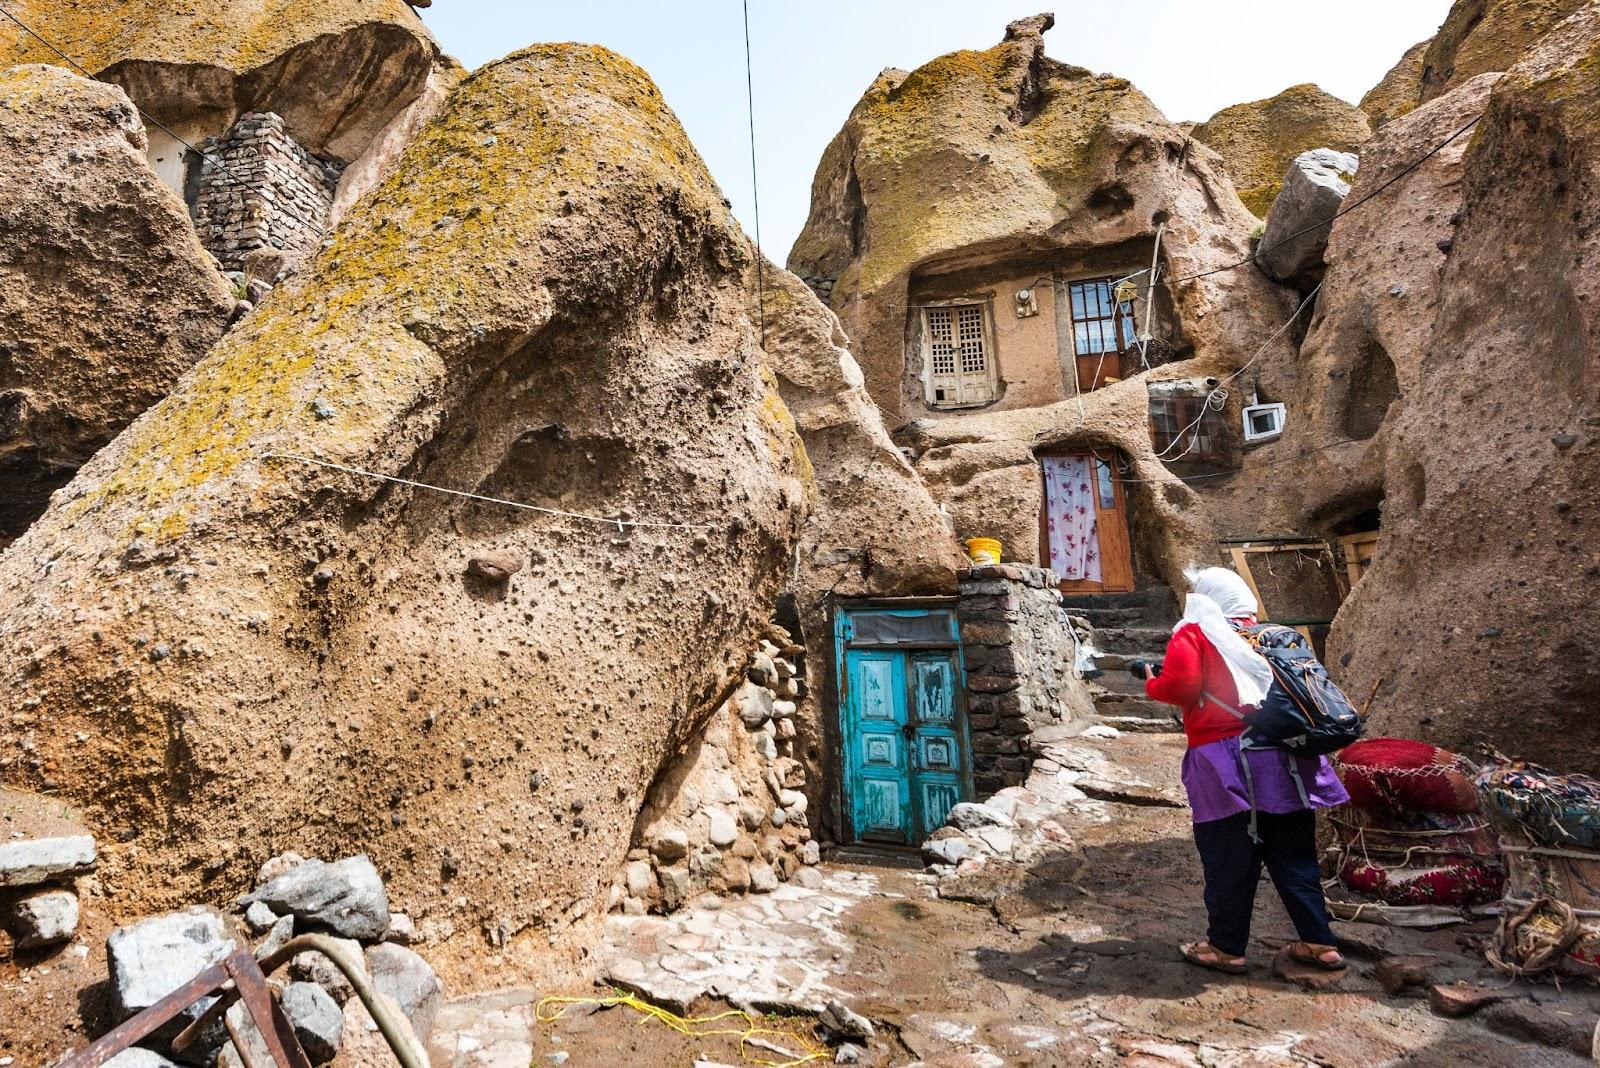 Up close of some of the Kandovan cave homes © C. Na Songkhla / Shutterstock